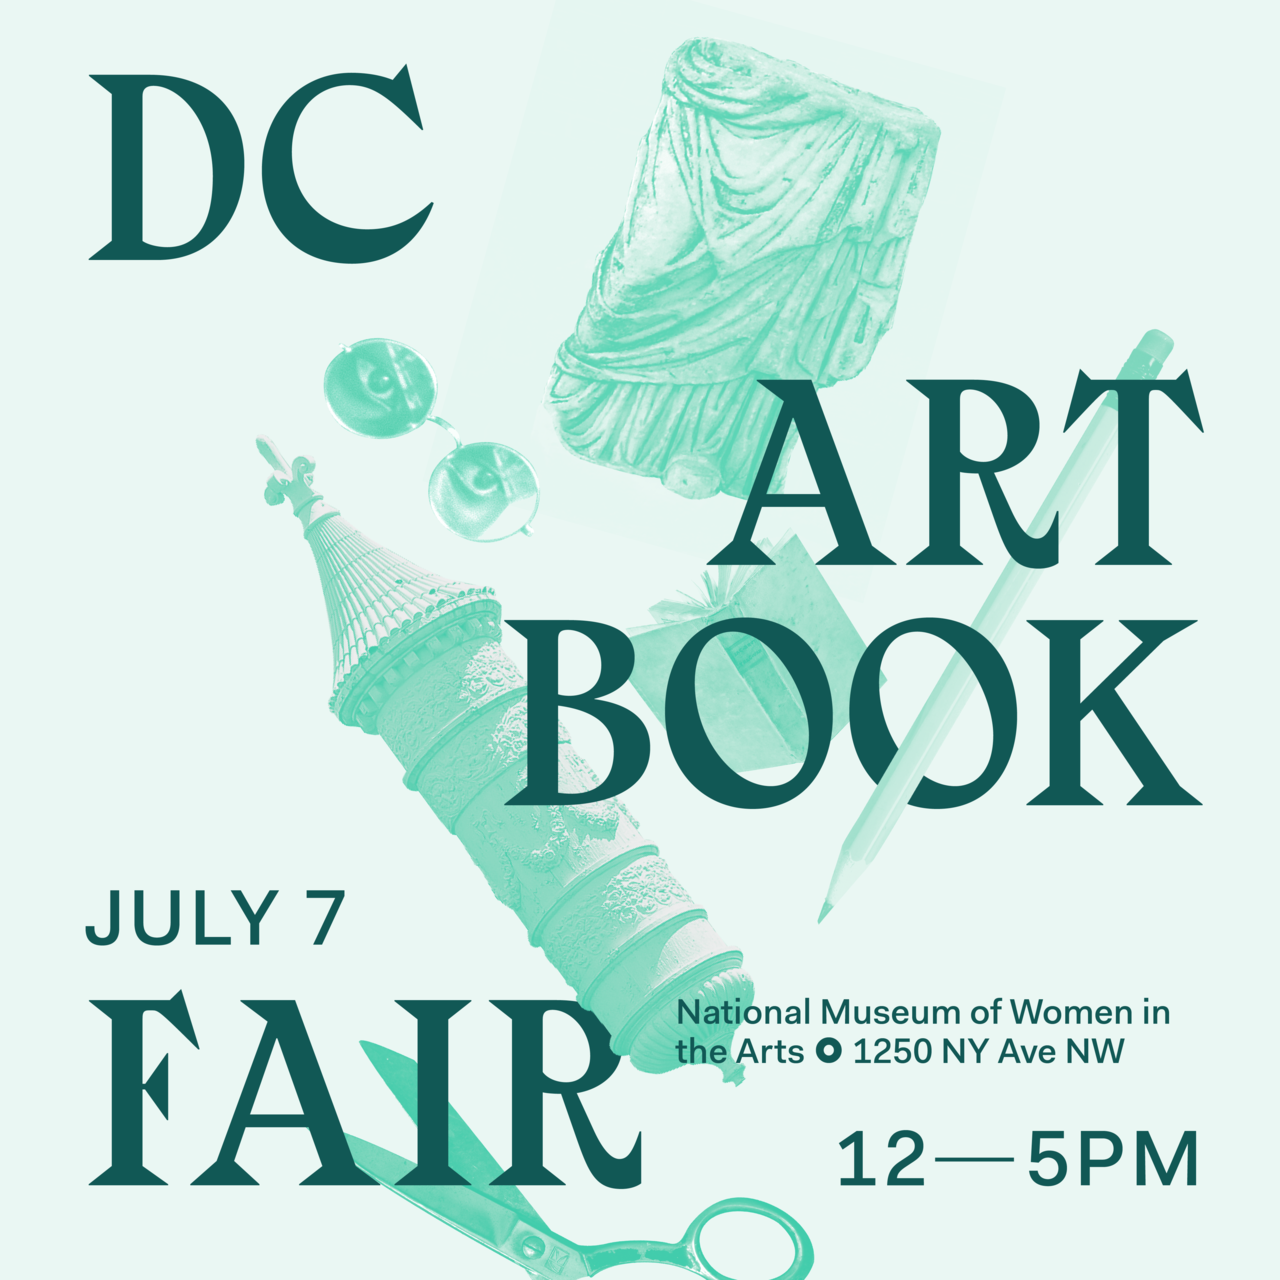 flyer for 2019 DC Art Book Fair with collage of pencil book scissors and other miscellaneous elements